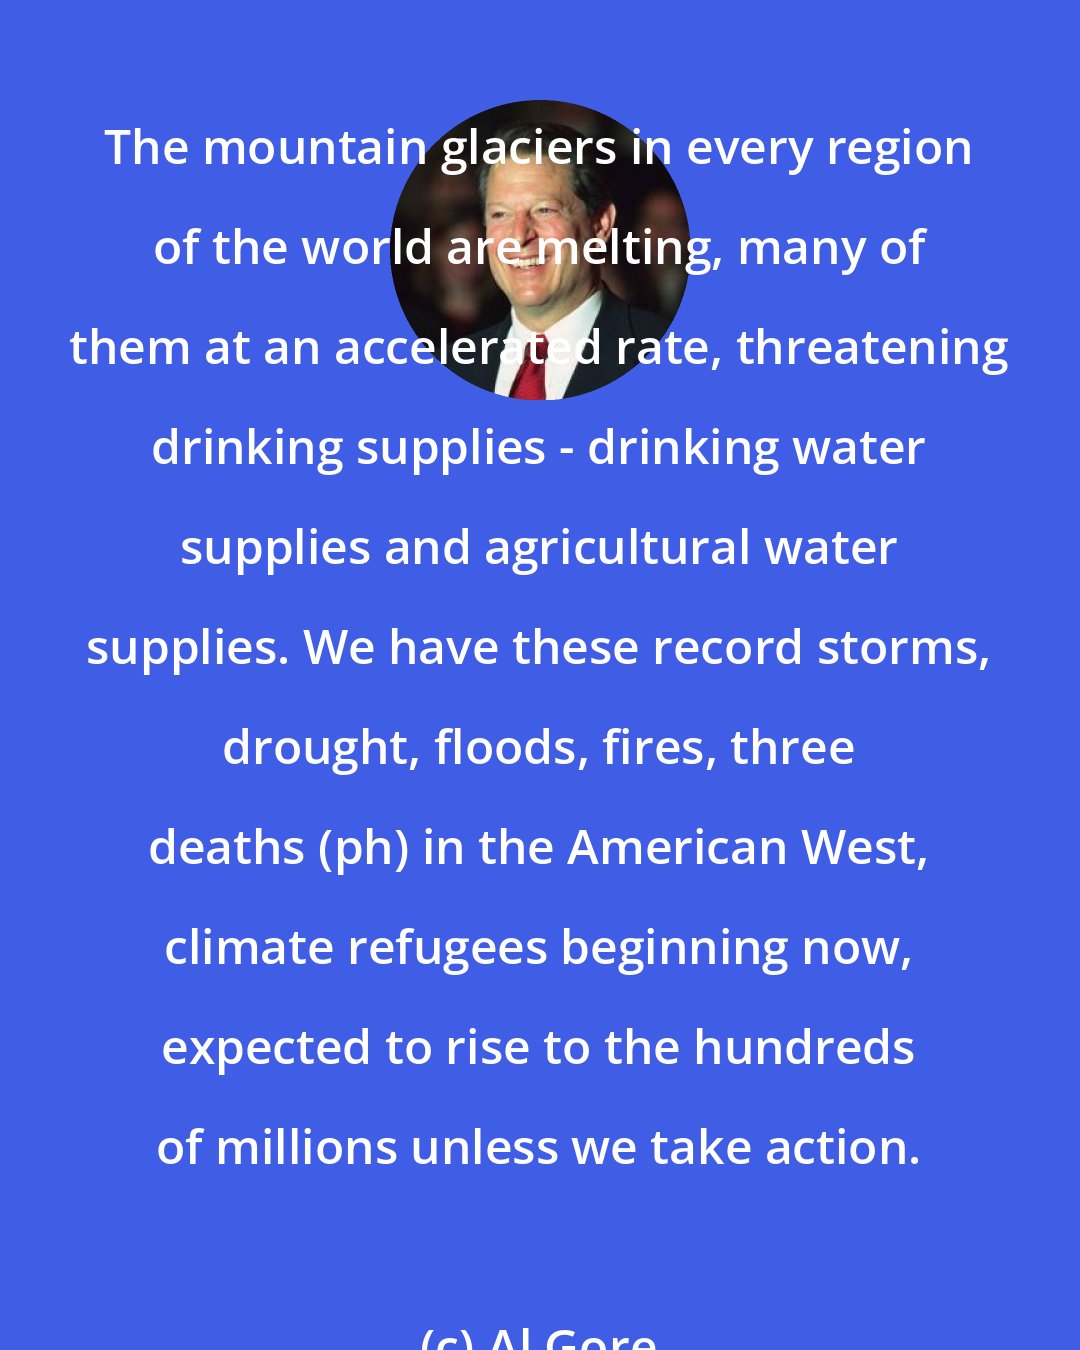 Al Gore: The mountain glaciers in every region of the world are melting, many of them at an accelerated rate, threatening drinking supplies - drinking water supplies and agricultural water supplies. We have these record storms, drought, floods, fires, three deaths (ph) in the American West, climate refugees beginning now, expected to rise to the hundreds of millions unless we take action.